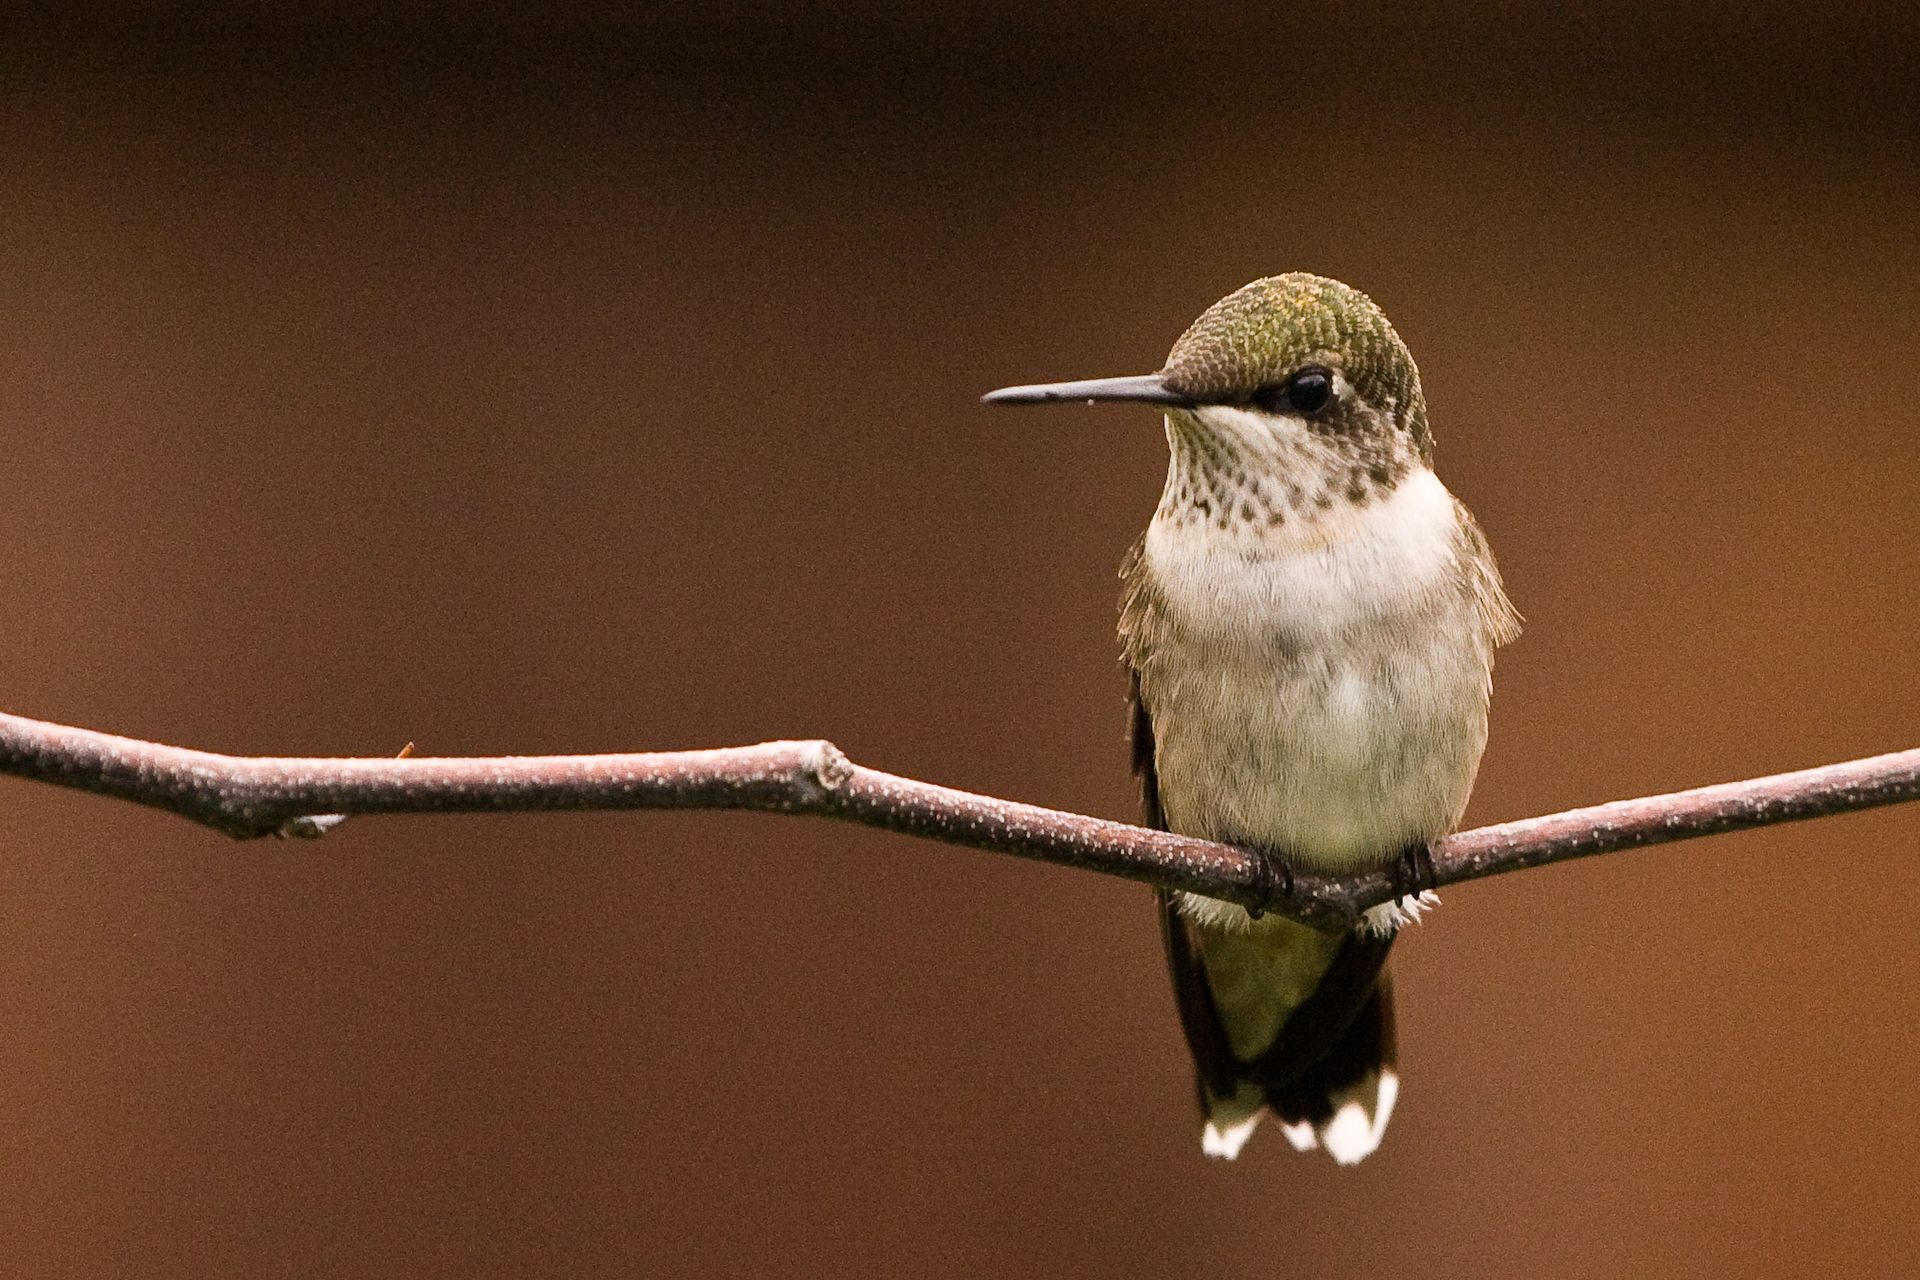 A hummingbird perched on a branch.